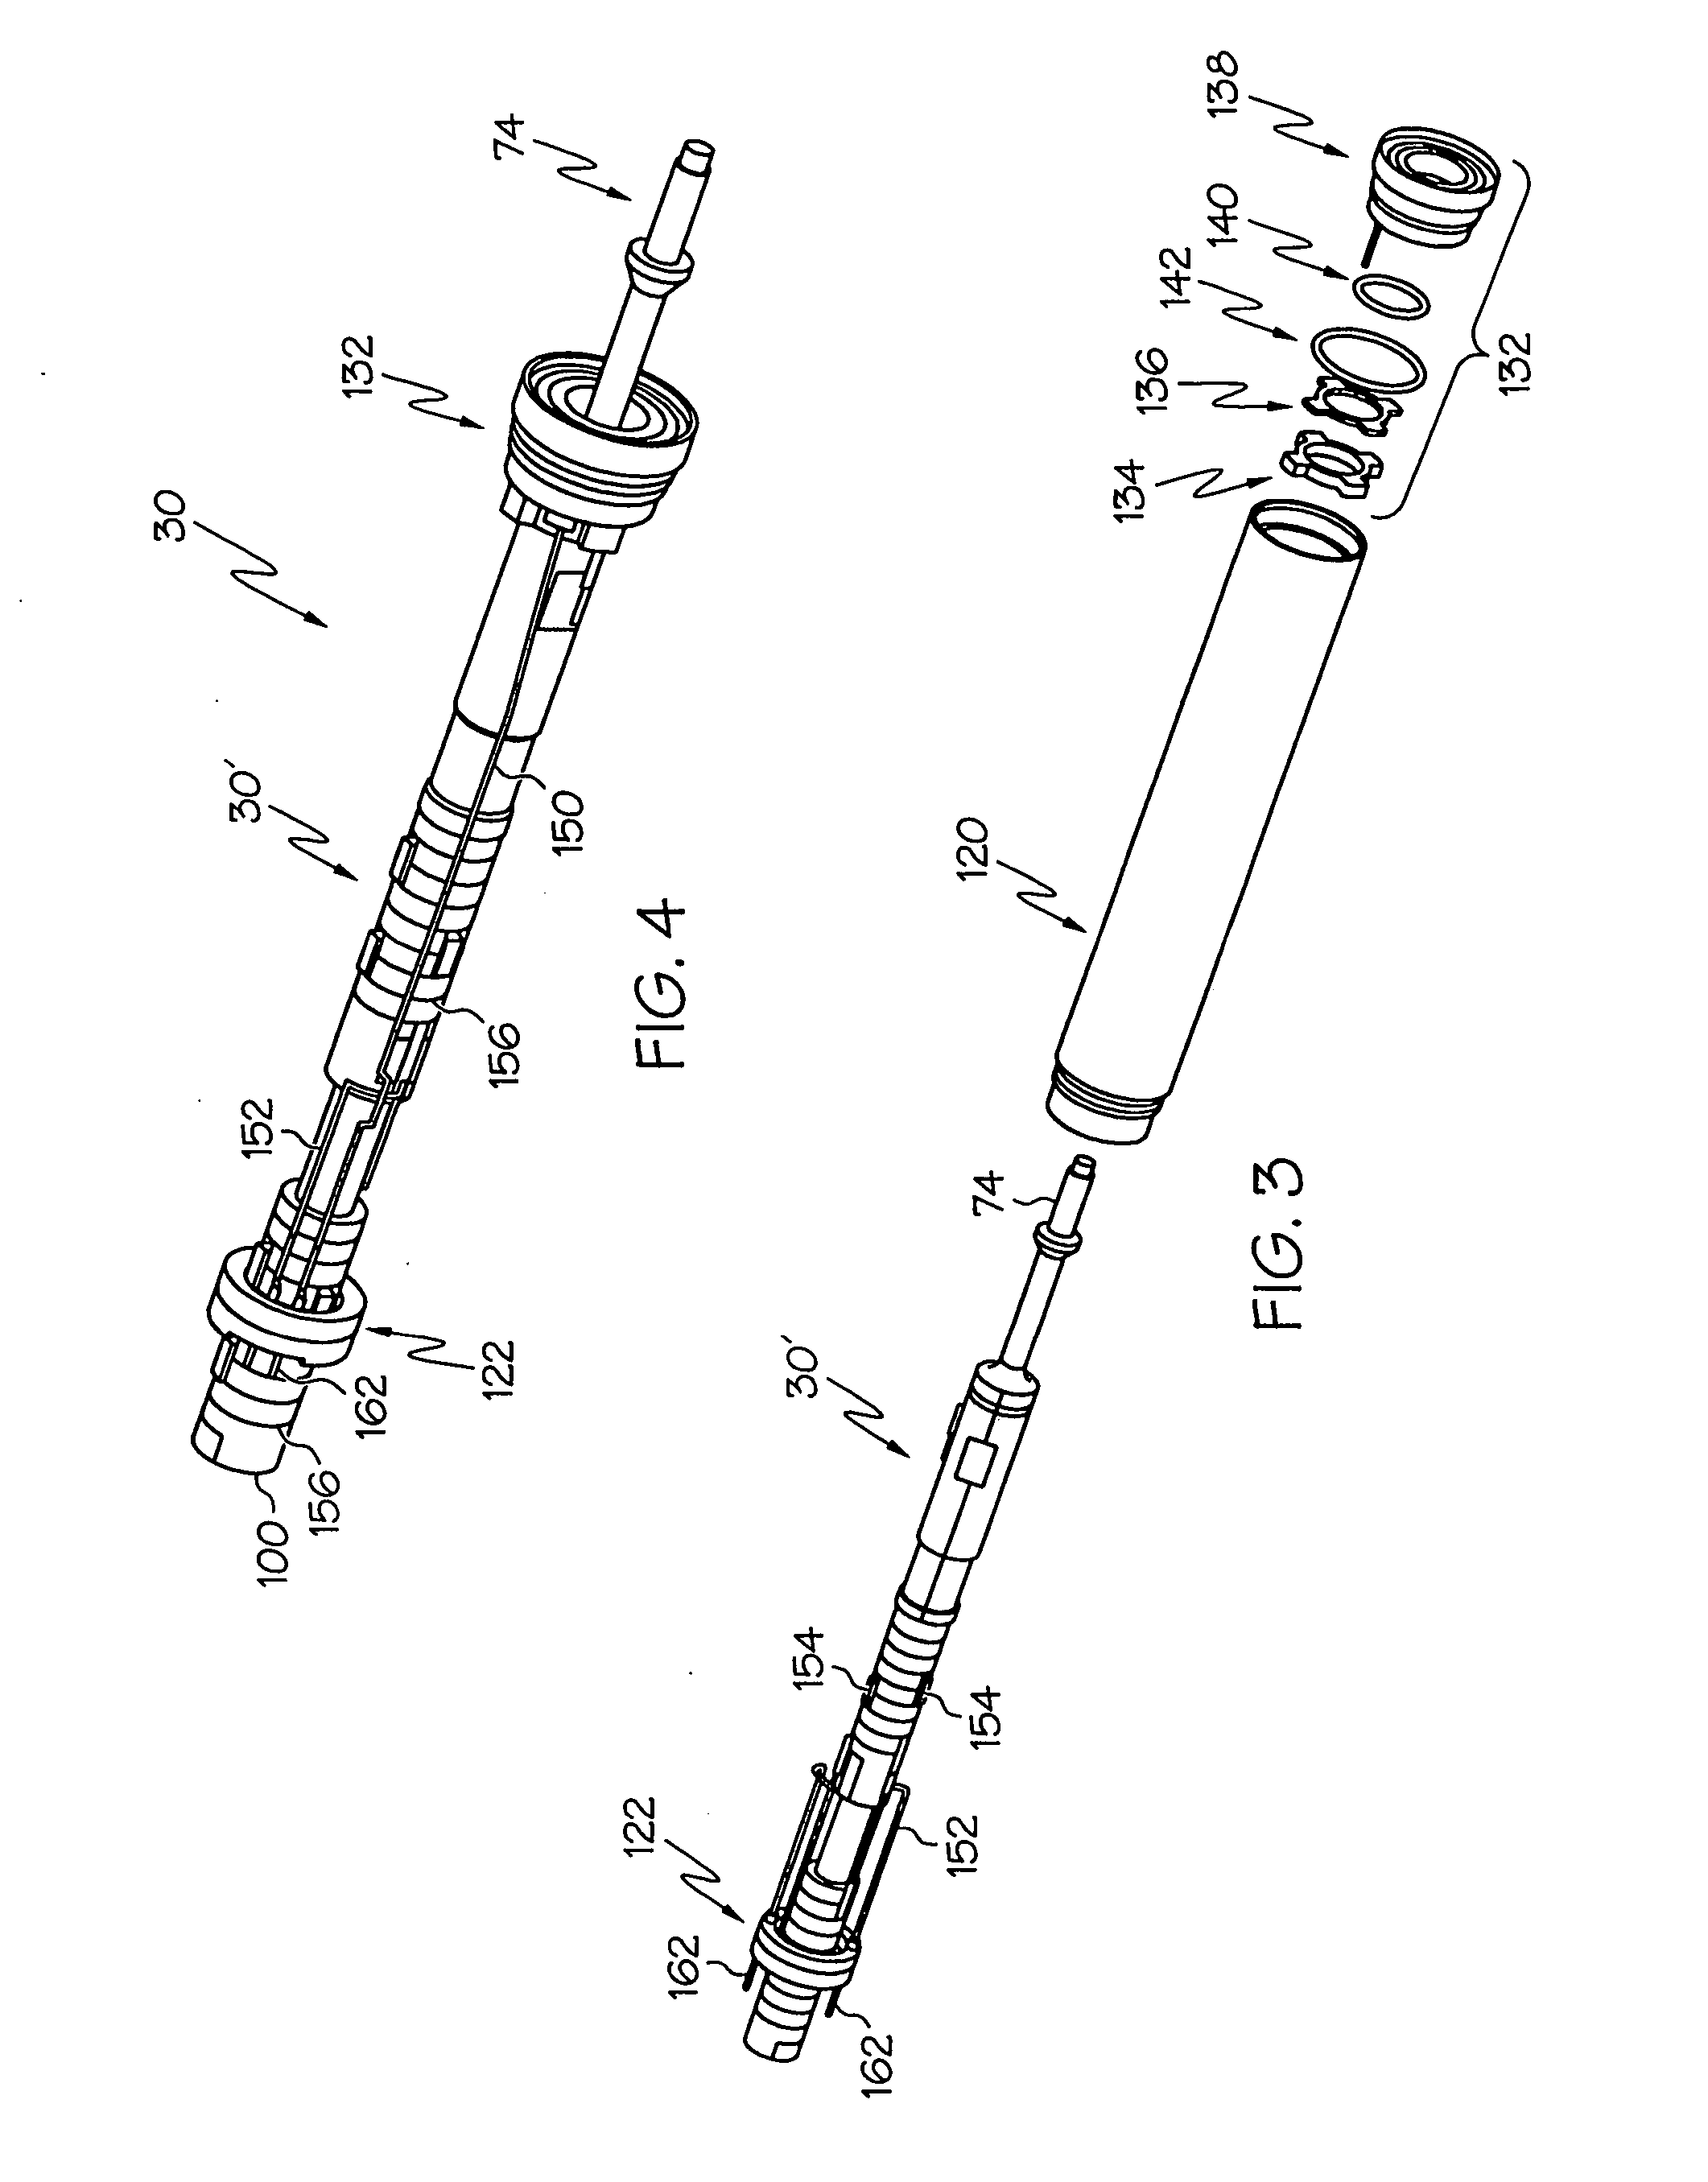 Medical ultrasound system and handpiece and methods for making and tuning